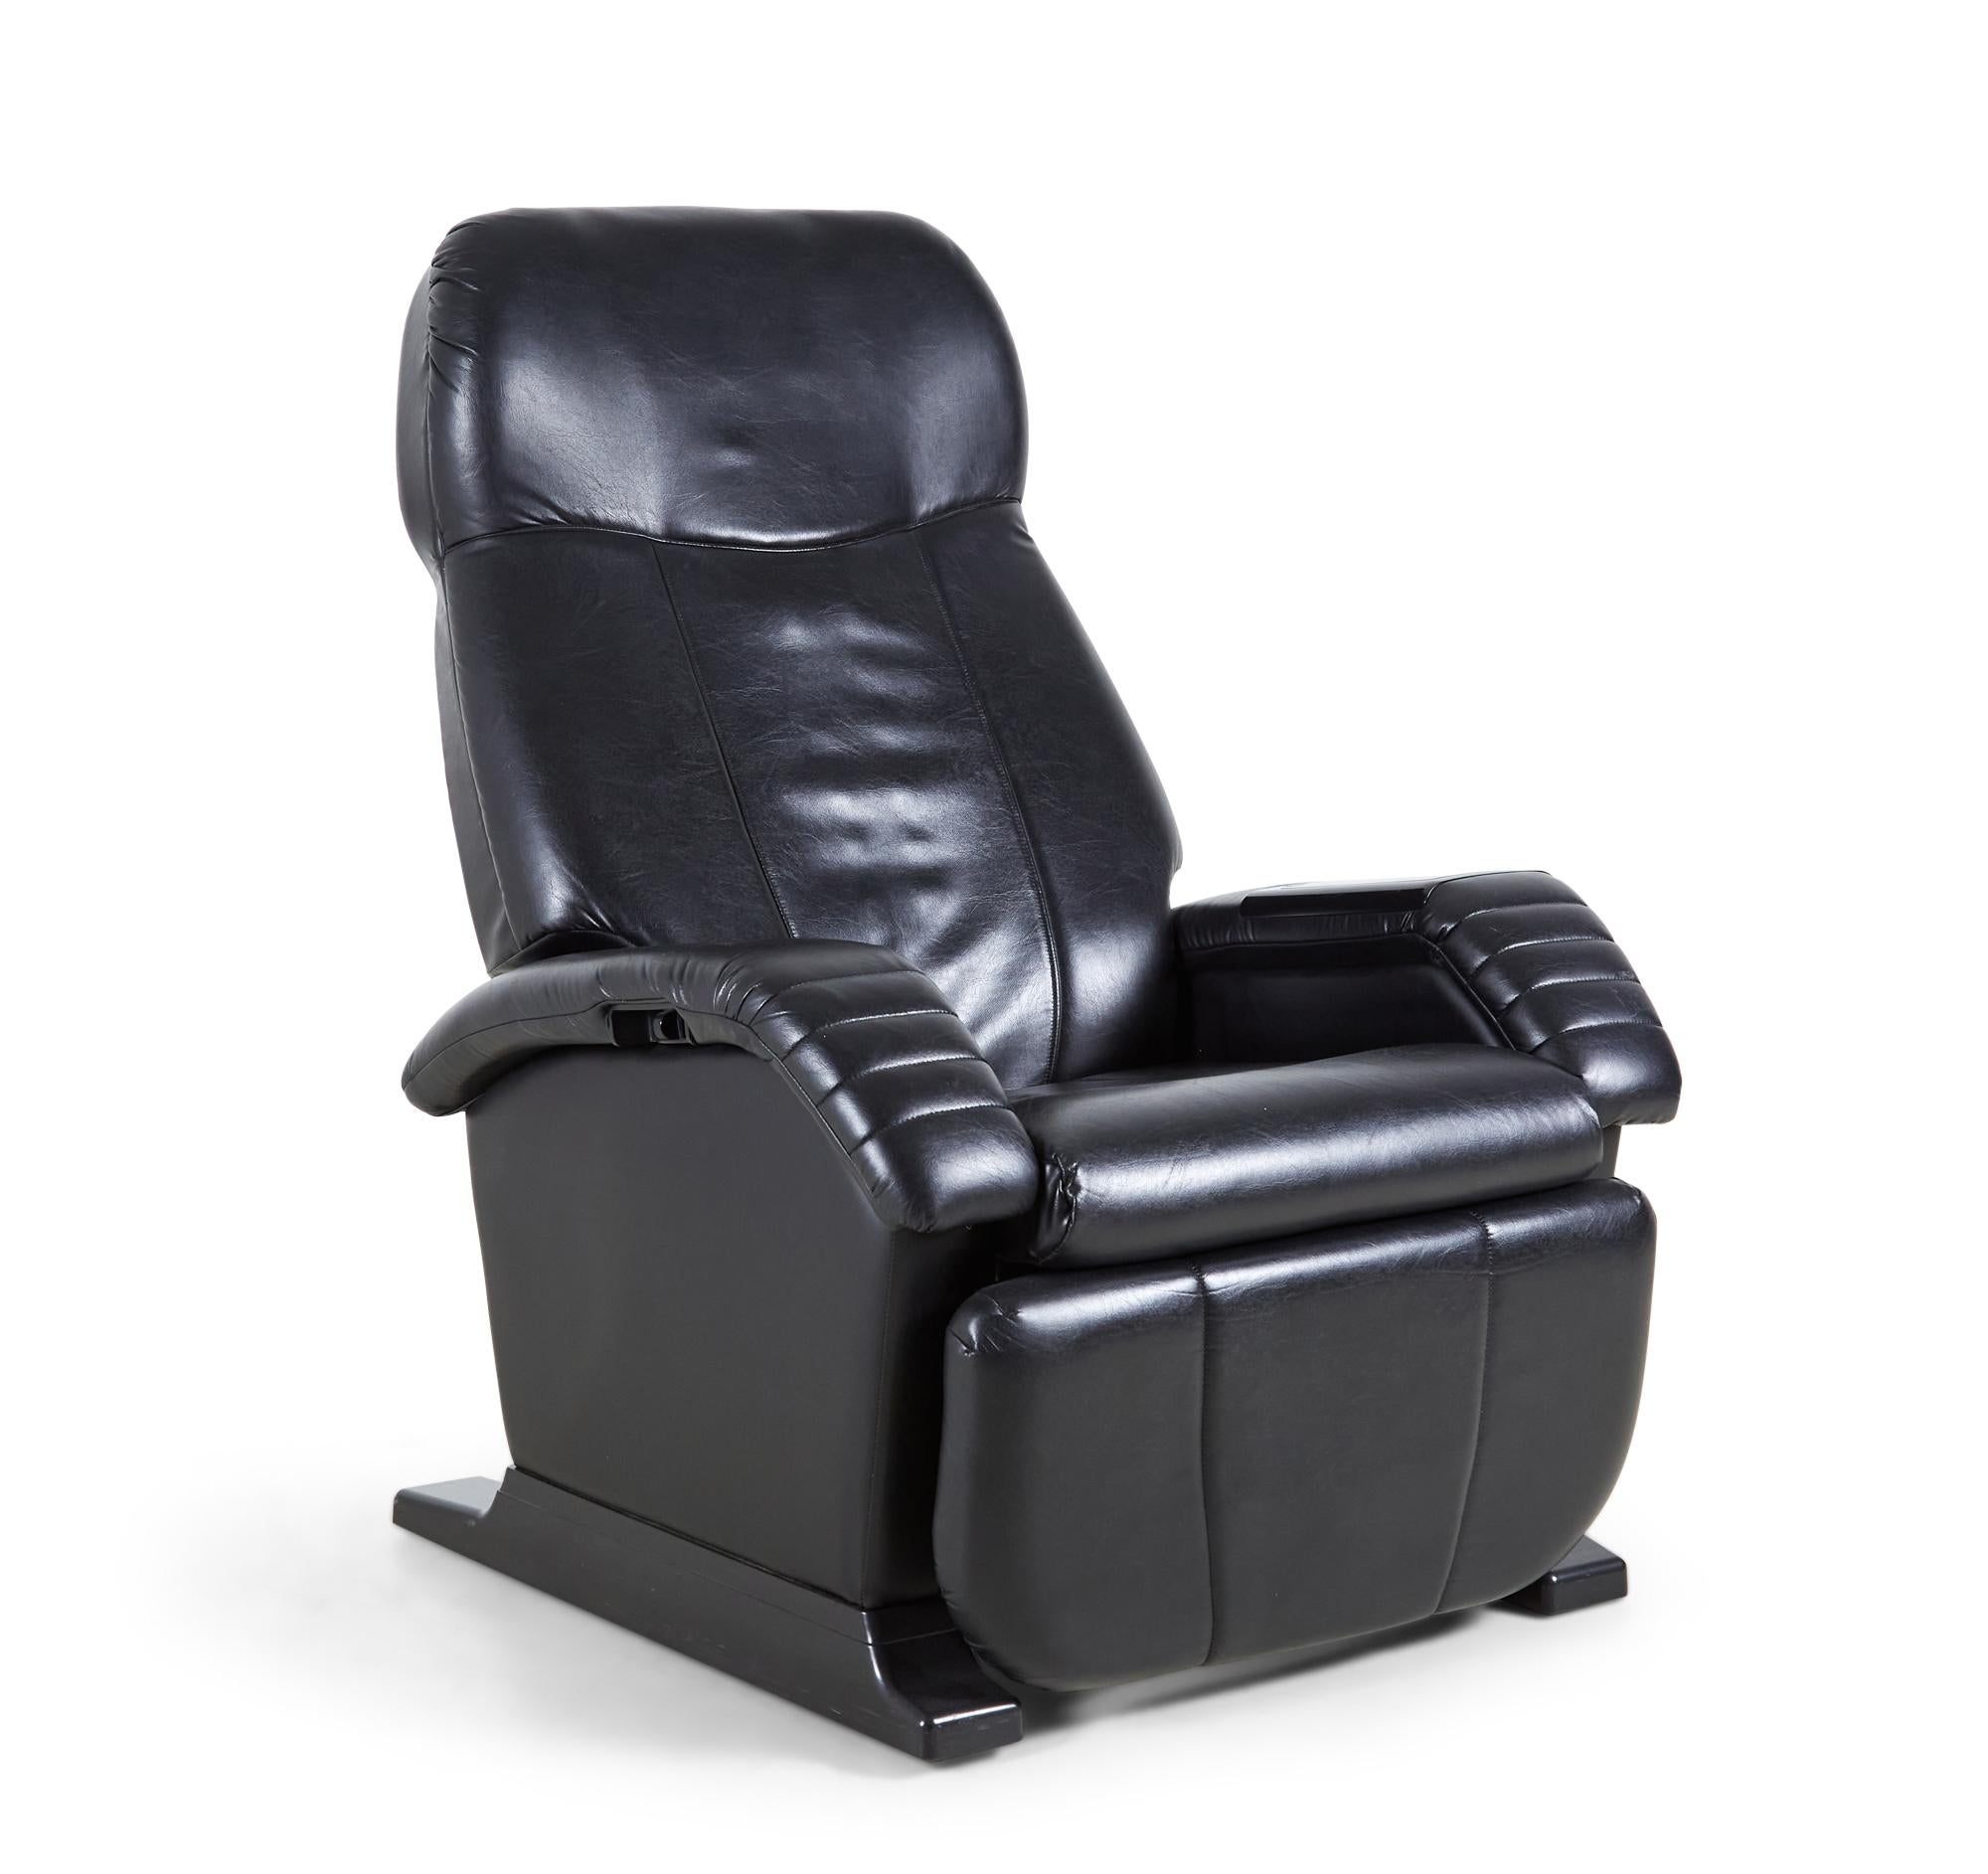 American Contemporary Black Leather Massage Chair 1